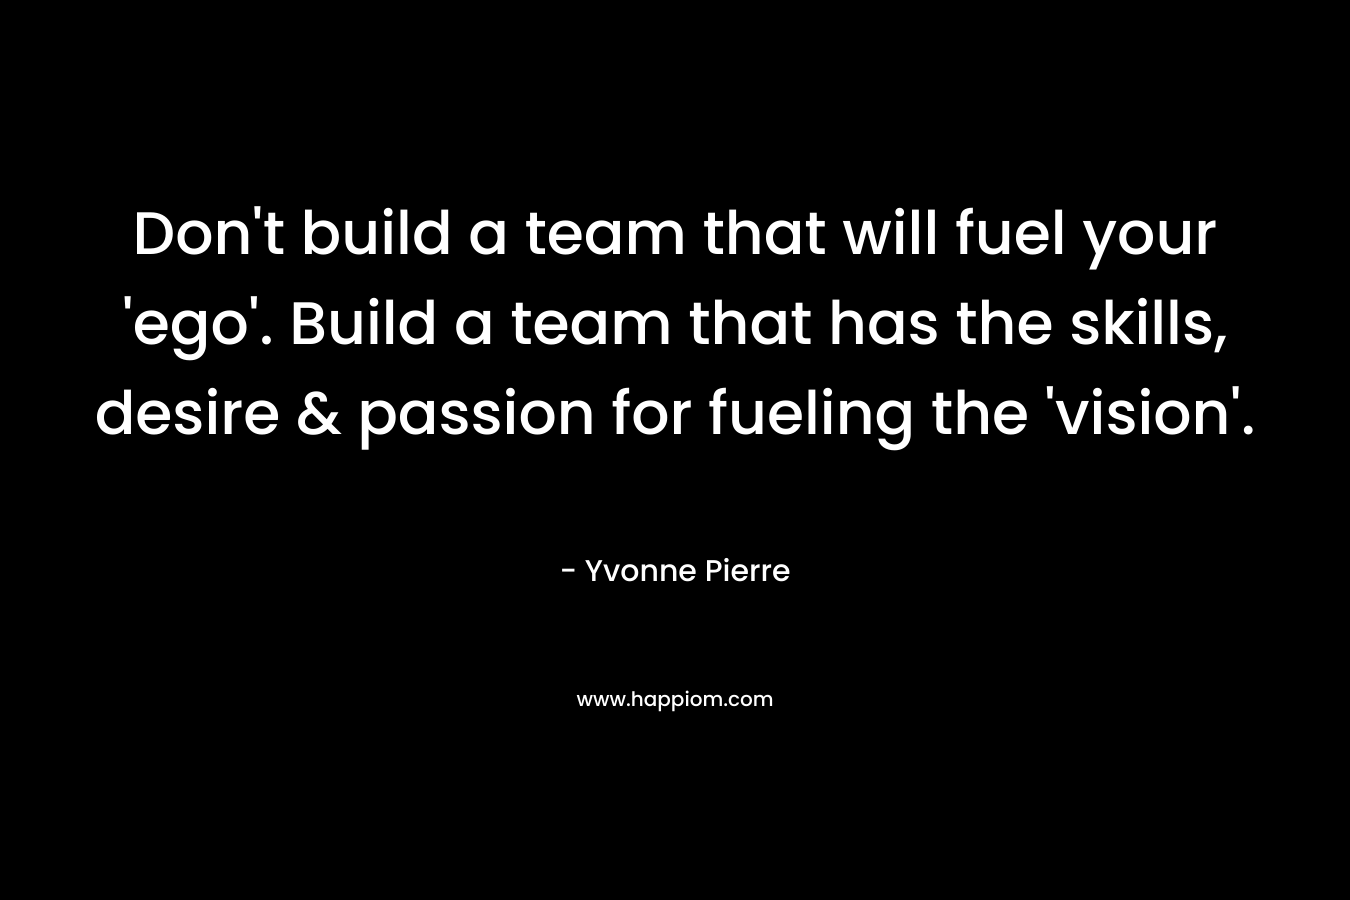 Don't build a team that will fuel your 'ego'. Build a team that has the skills, desire & passion for fueling the 'vision'.